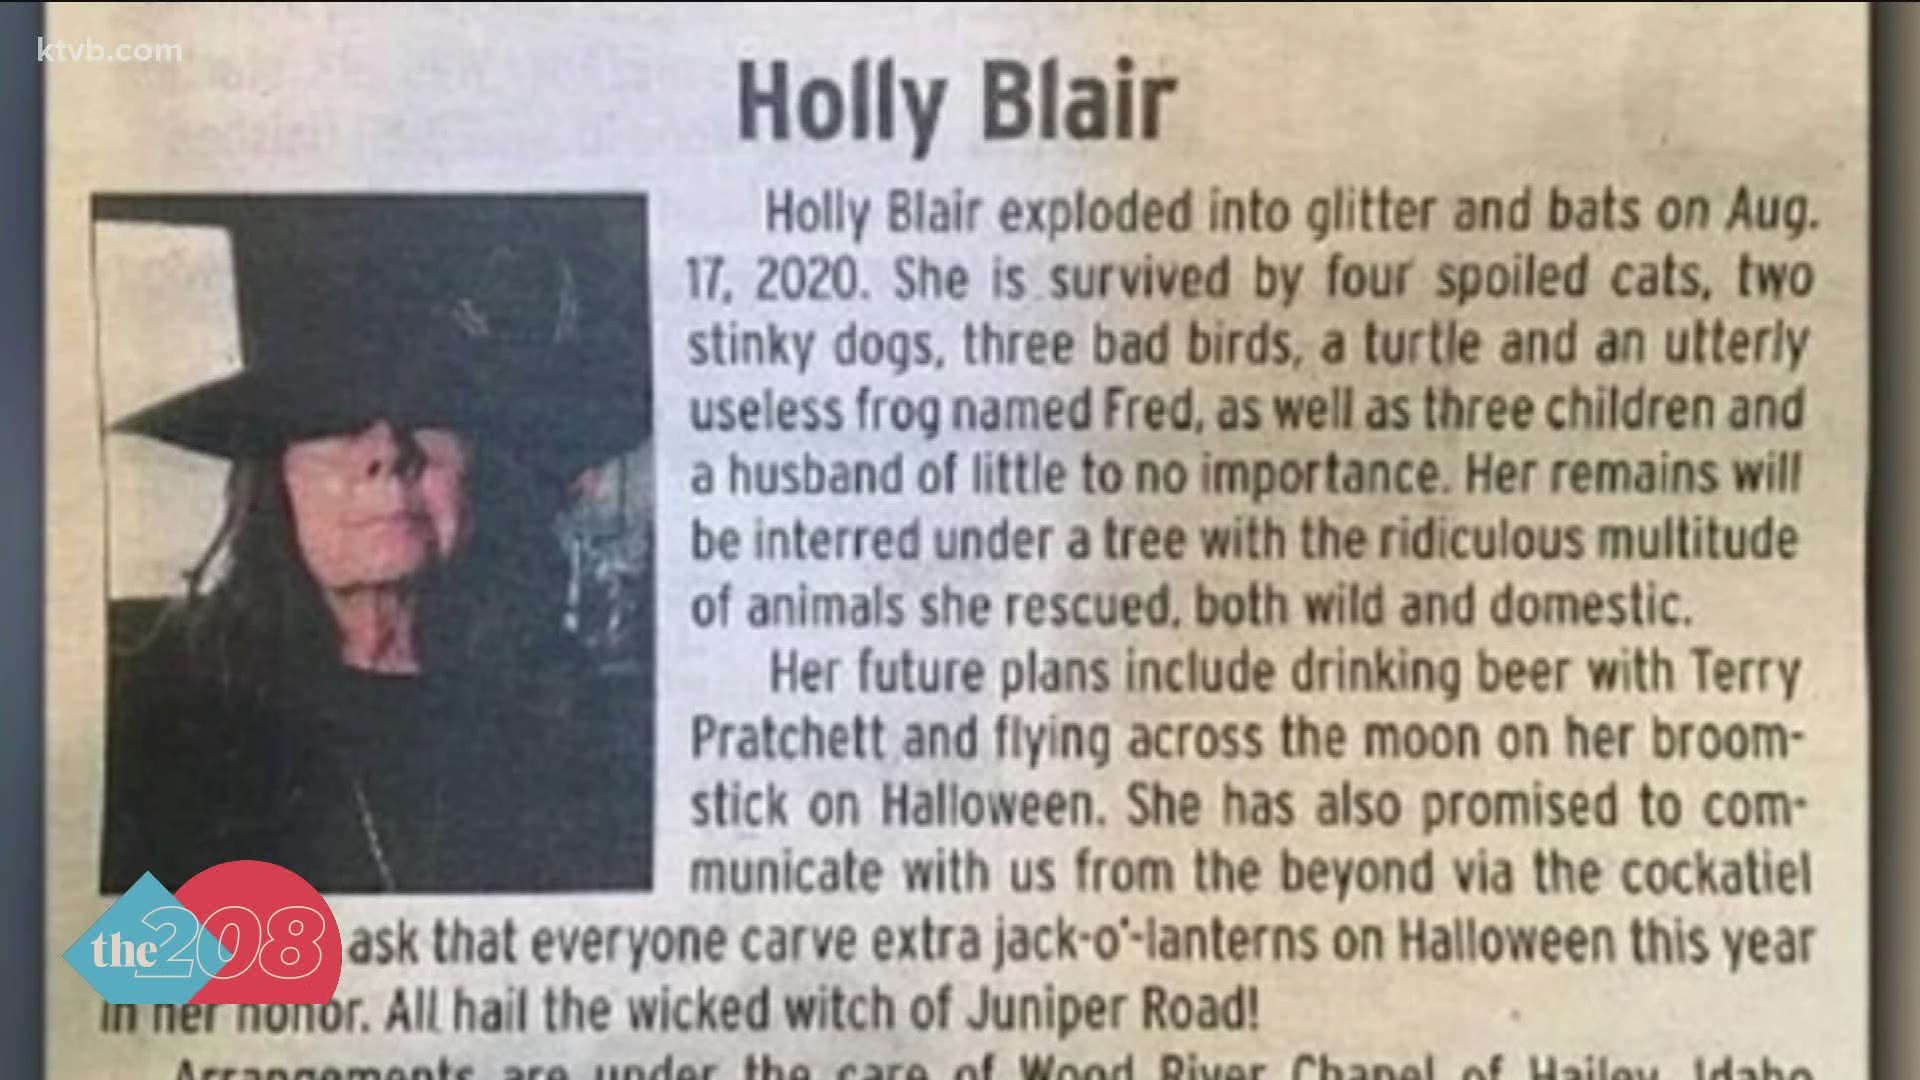 We came across this obituary of Holly Blair that will lift your spirits. It's a spiritual tribute from the Wood River Chapel in Hailey.